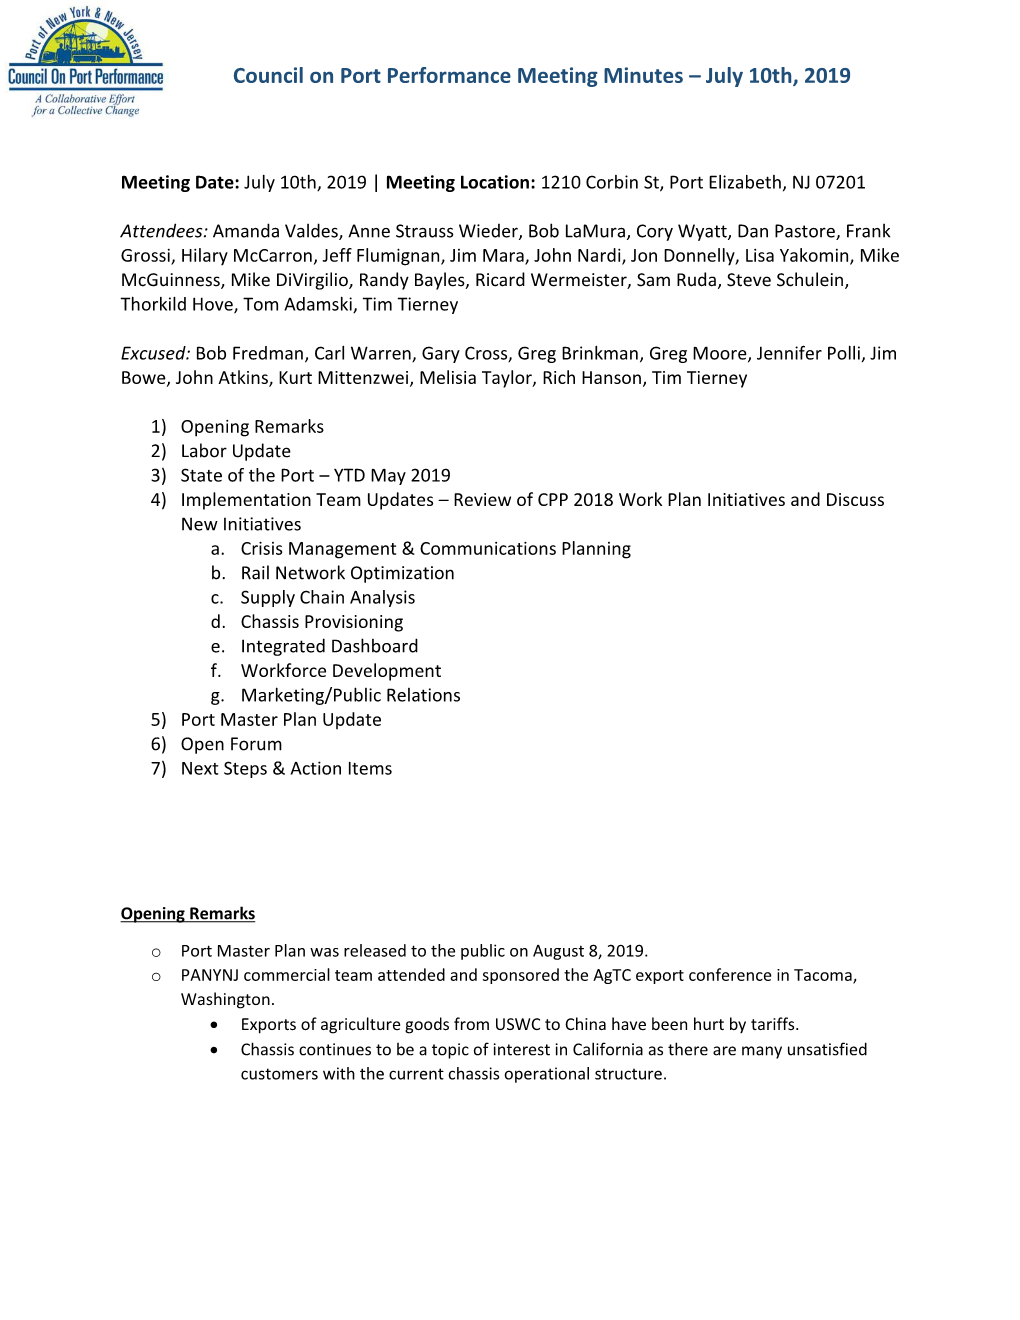 Council on Port Performance Meeting Minutes – July 10Th, 2019